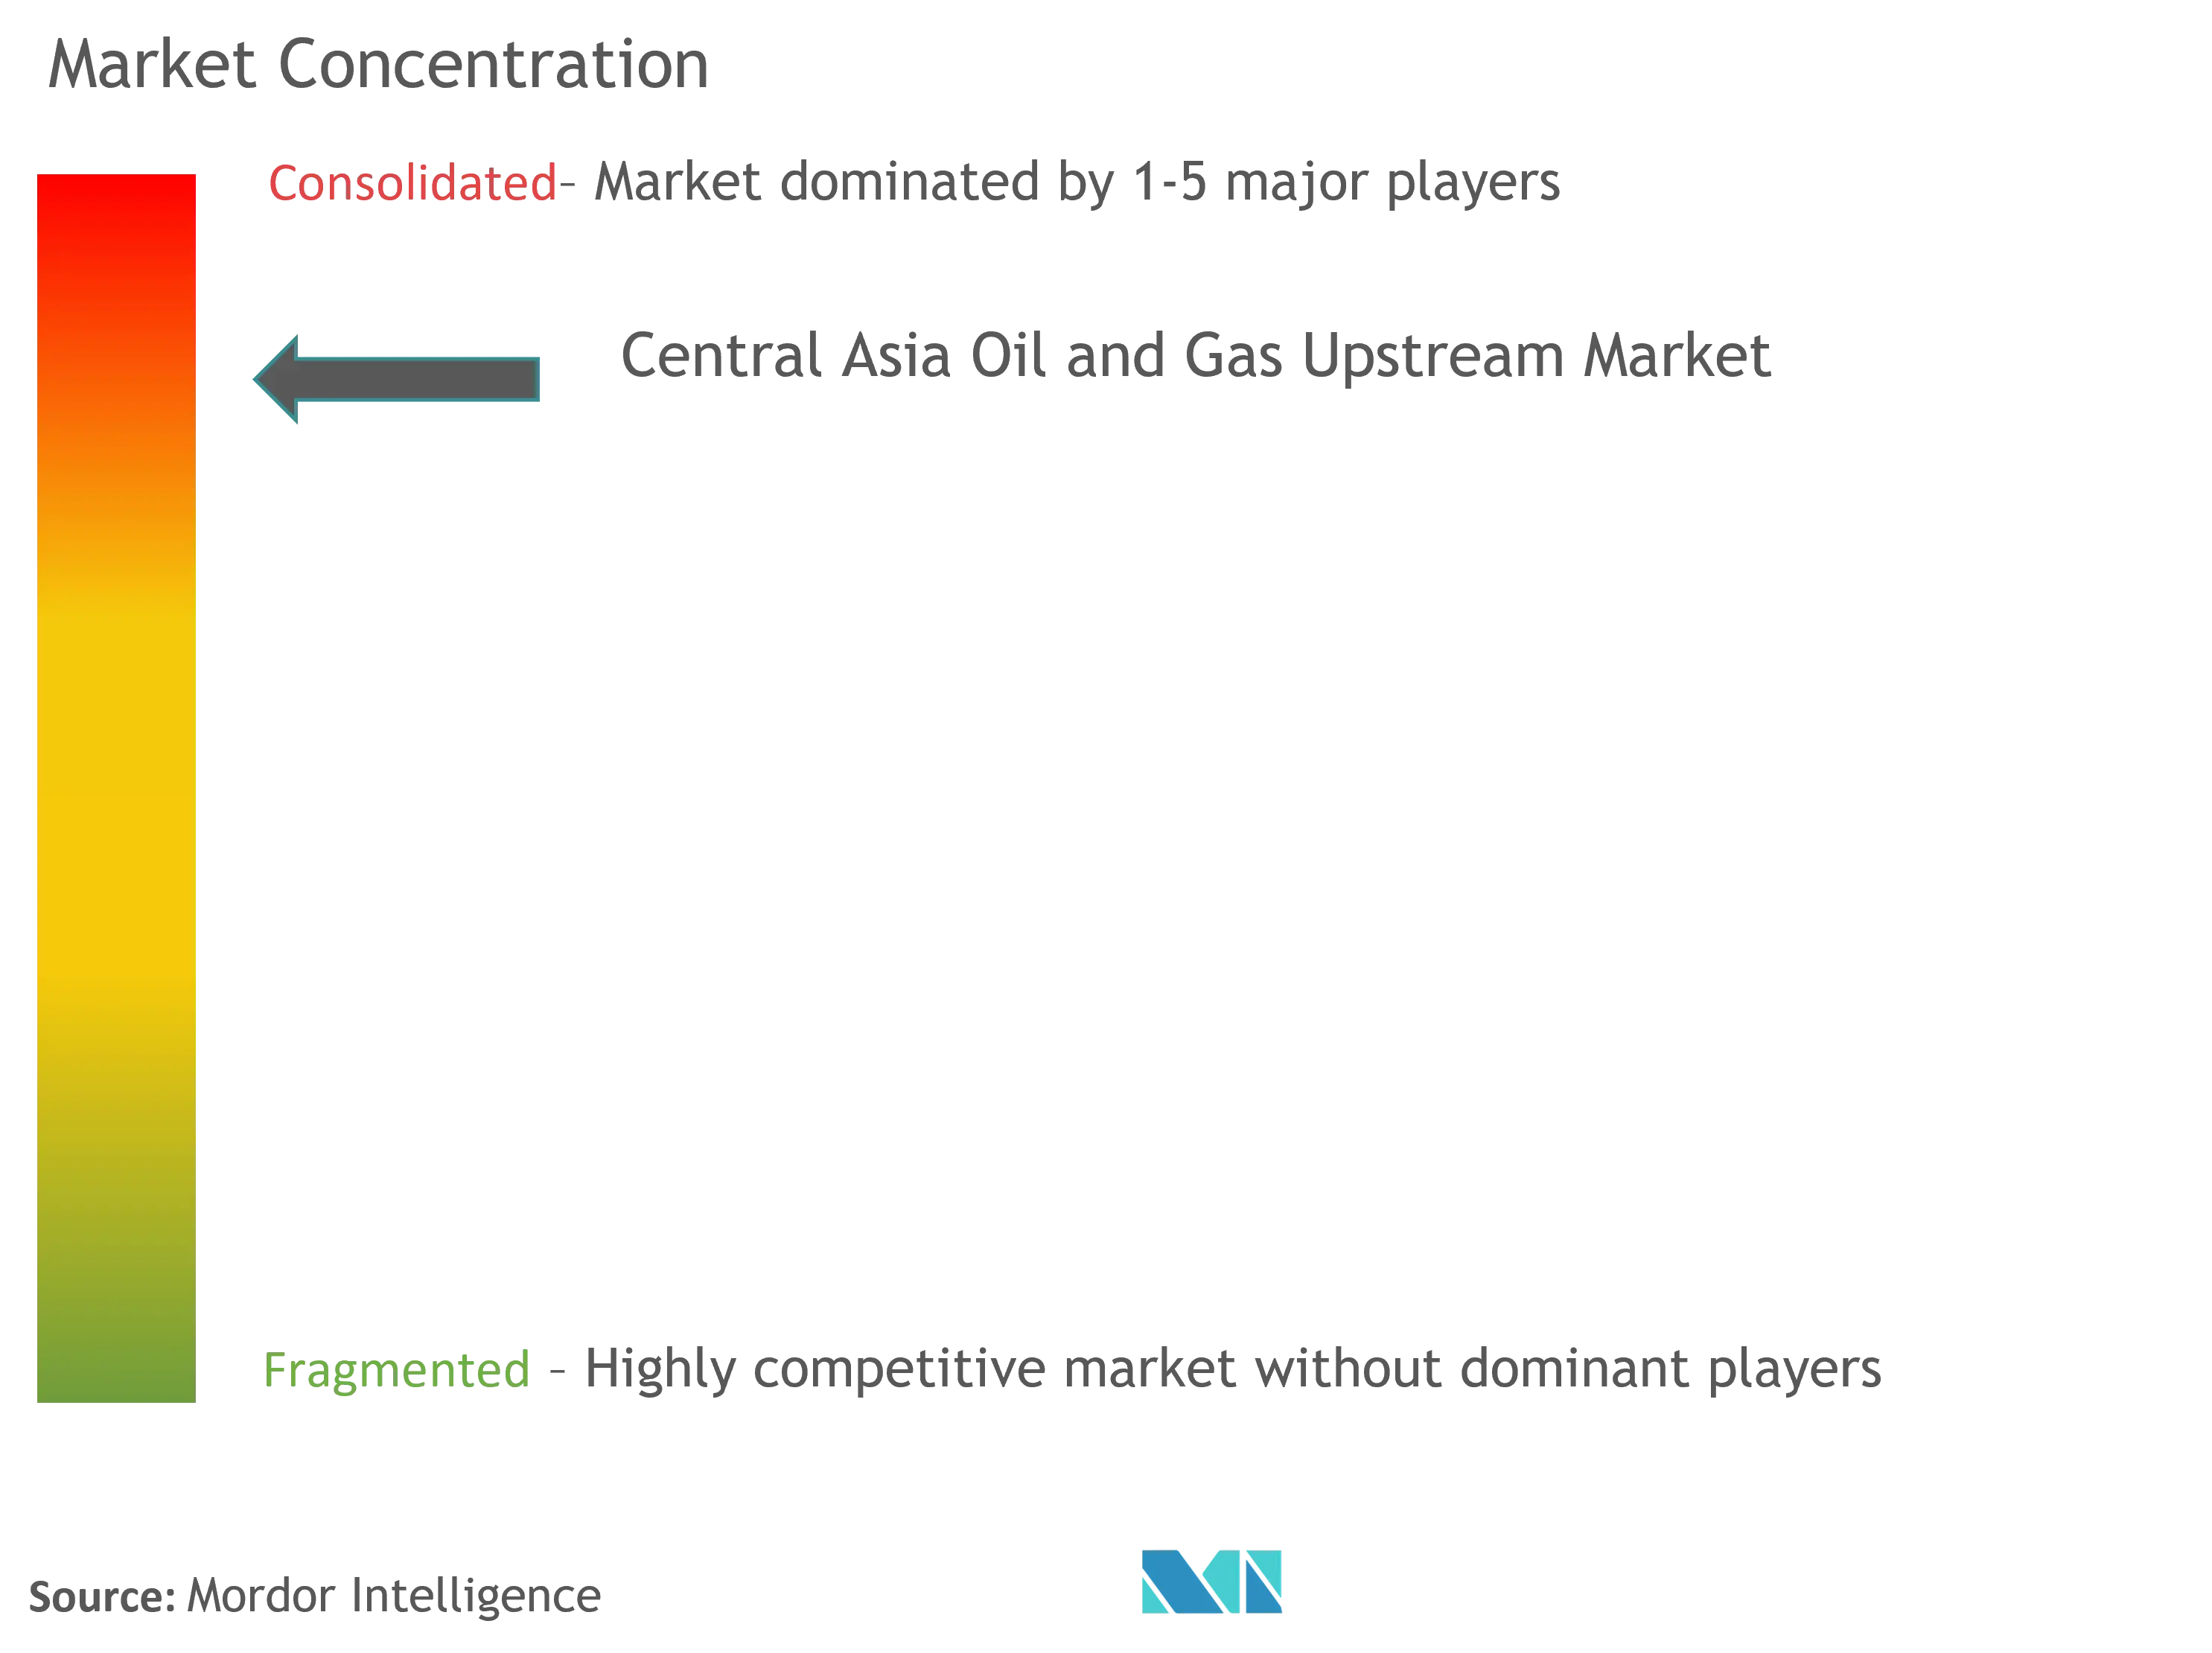 Market Concentration - Central Asia Oil and Gas Upstream Market.png